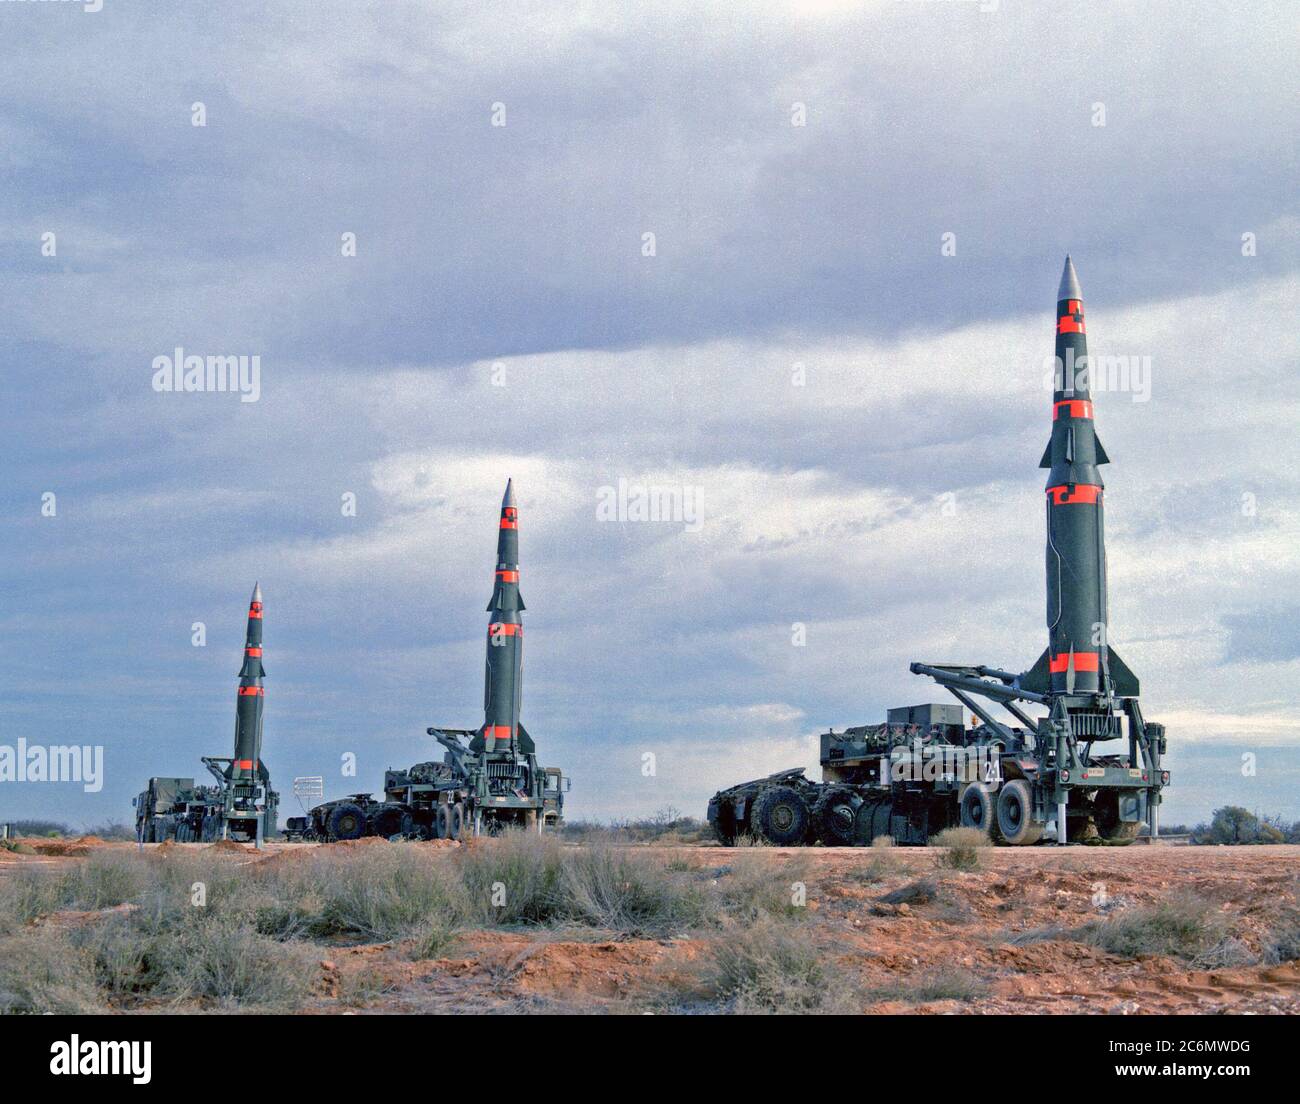 Several Pershing II missiles are prepared for launching at the McGregor Range. Stock Photo